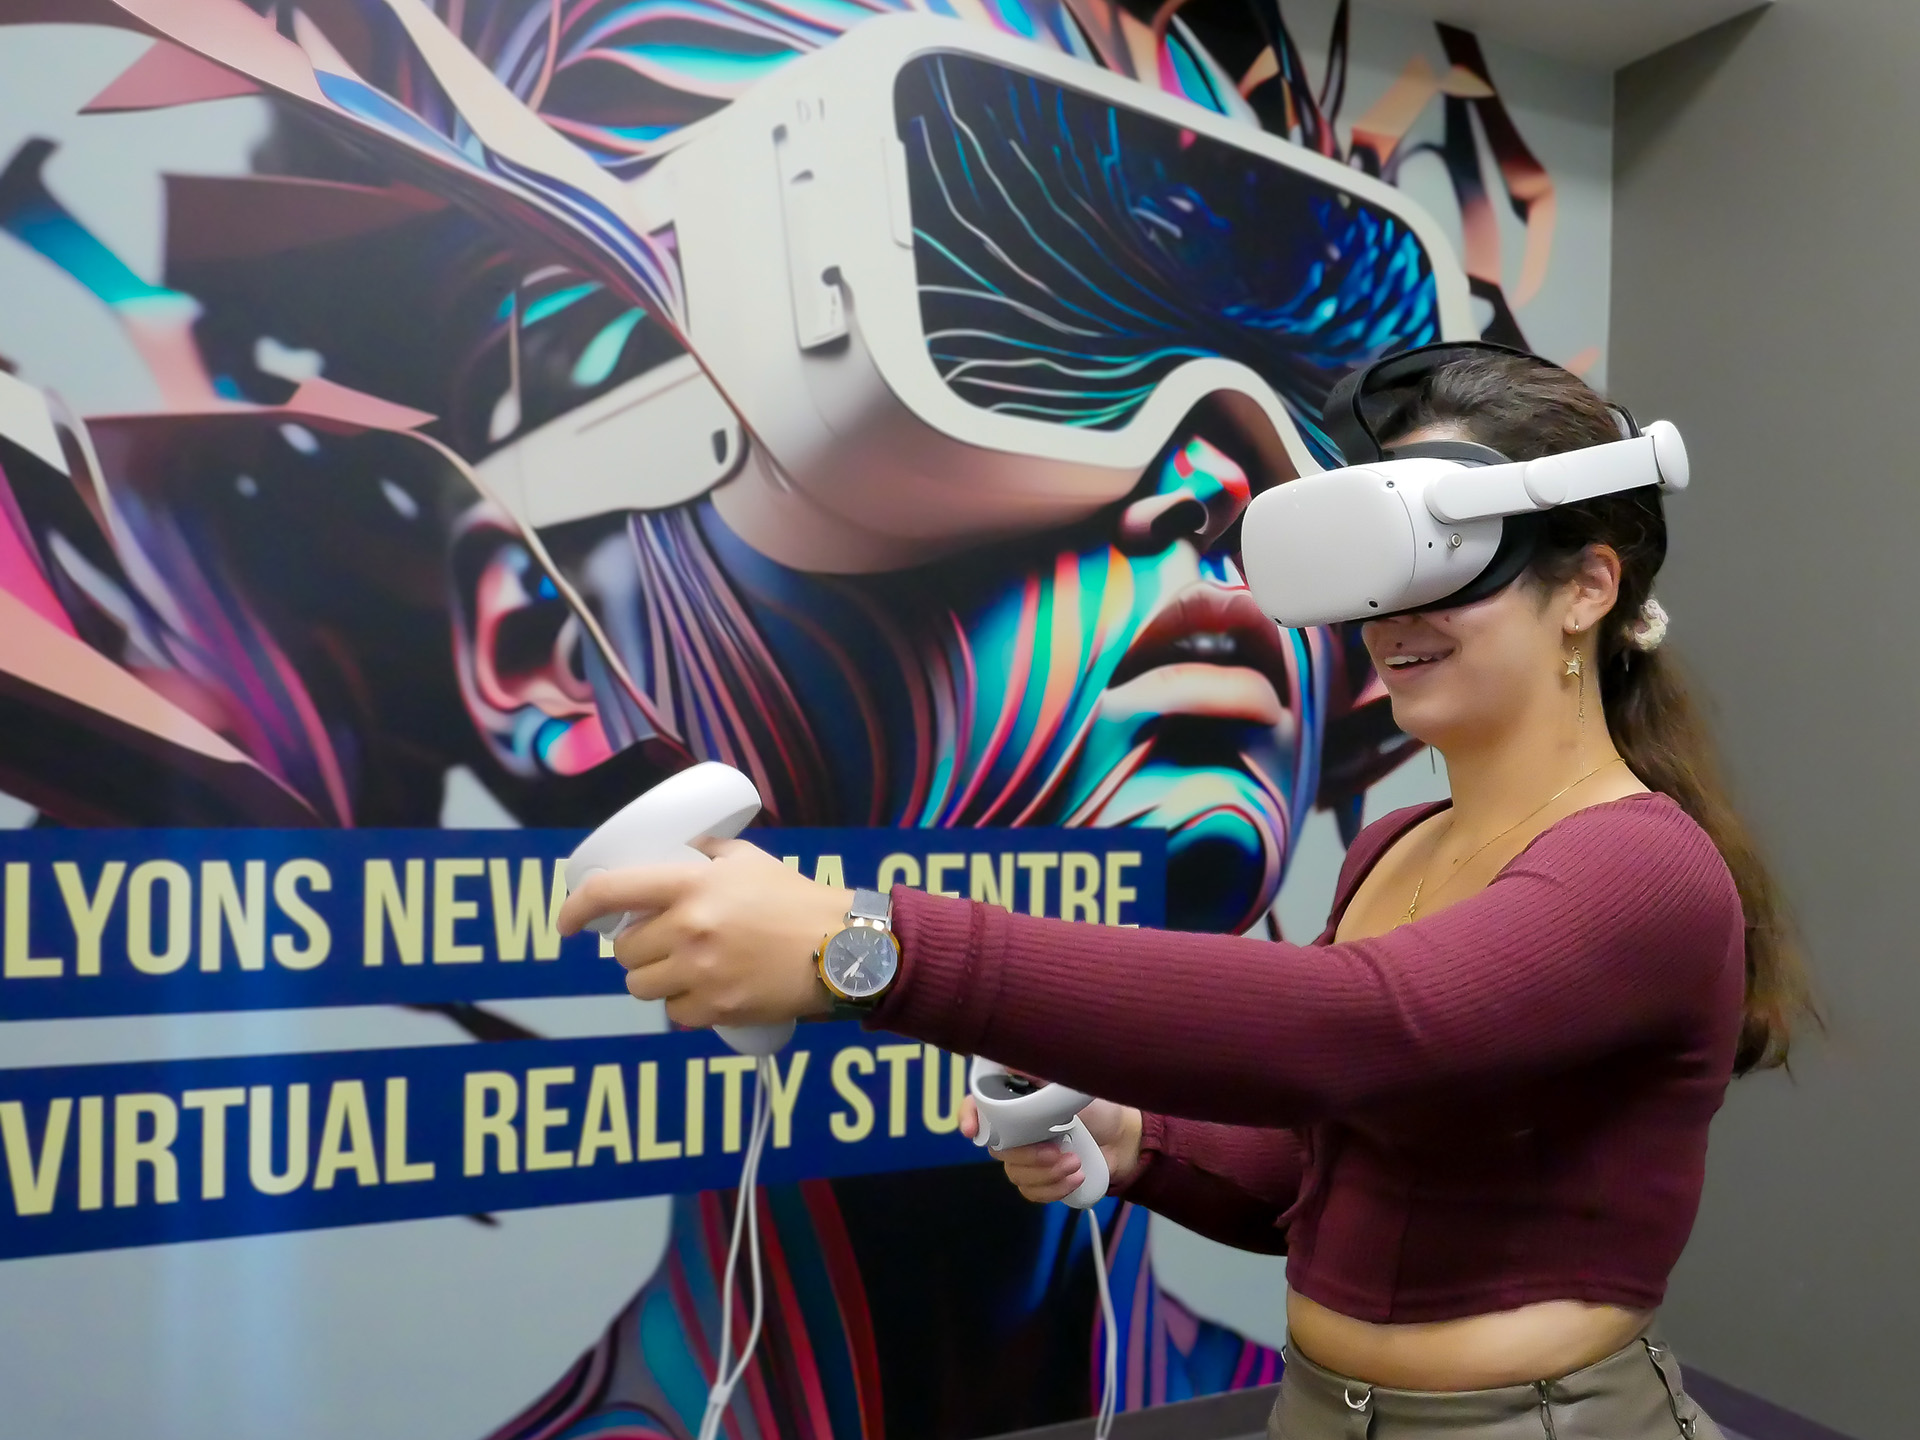 A young woman wearing a VR headset and holding the controllers tries out the virtual reality room in Lyons. A colourful, futuristic image of a woman wearing VR goggles can be seen on the wall behind.